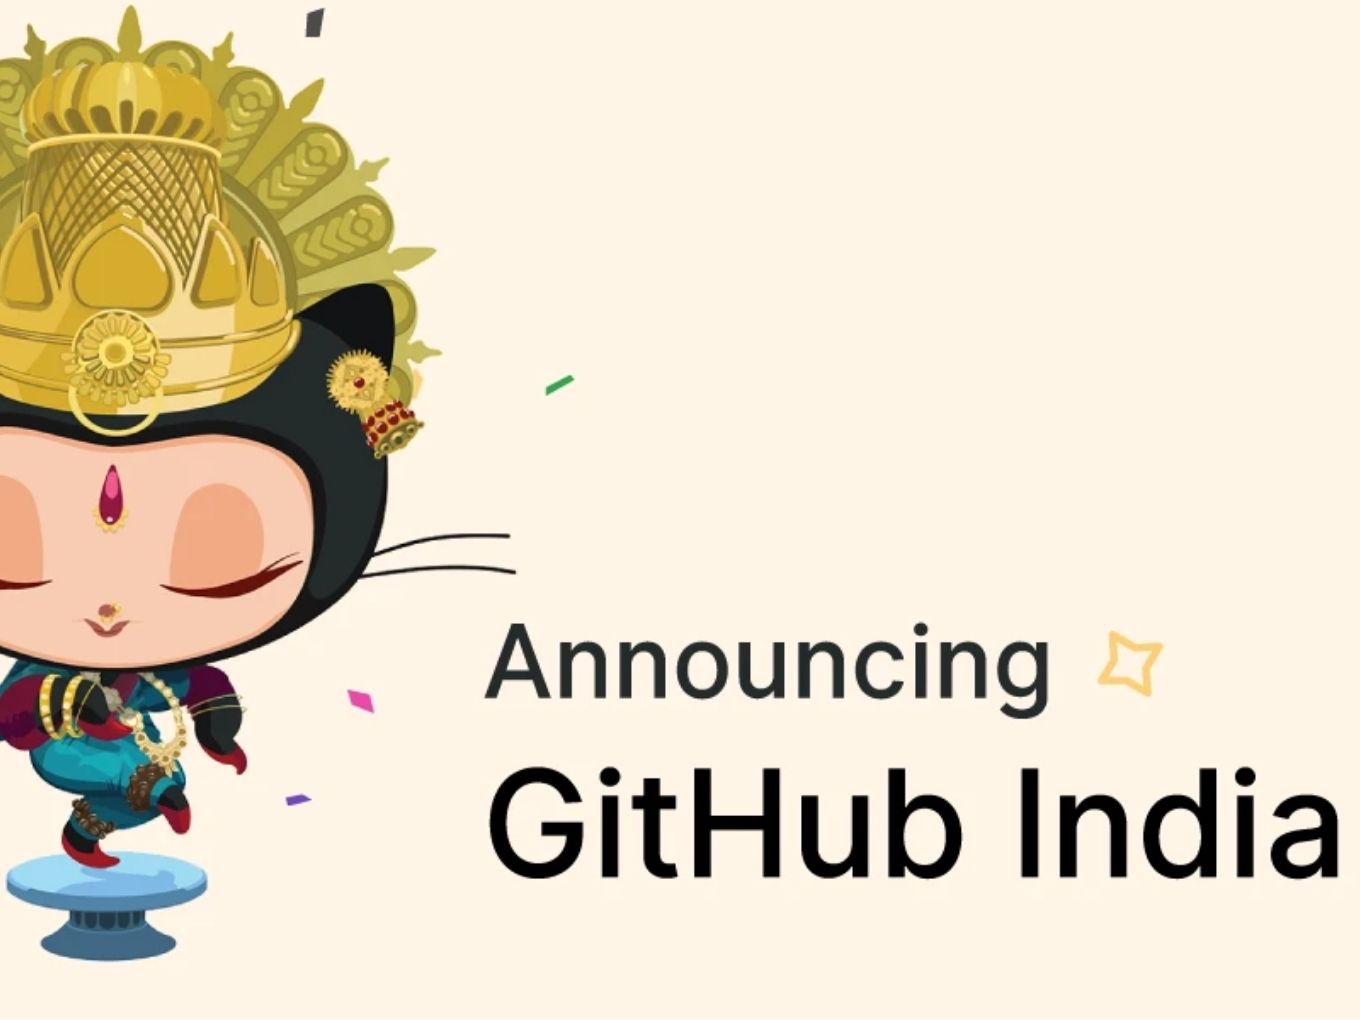 GitHub Launches Indian Operations To Bring More Developers On Board